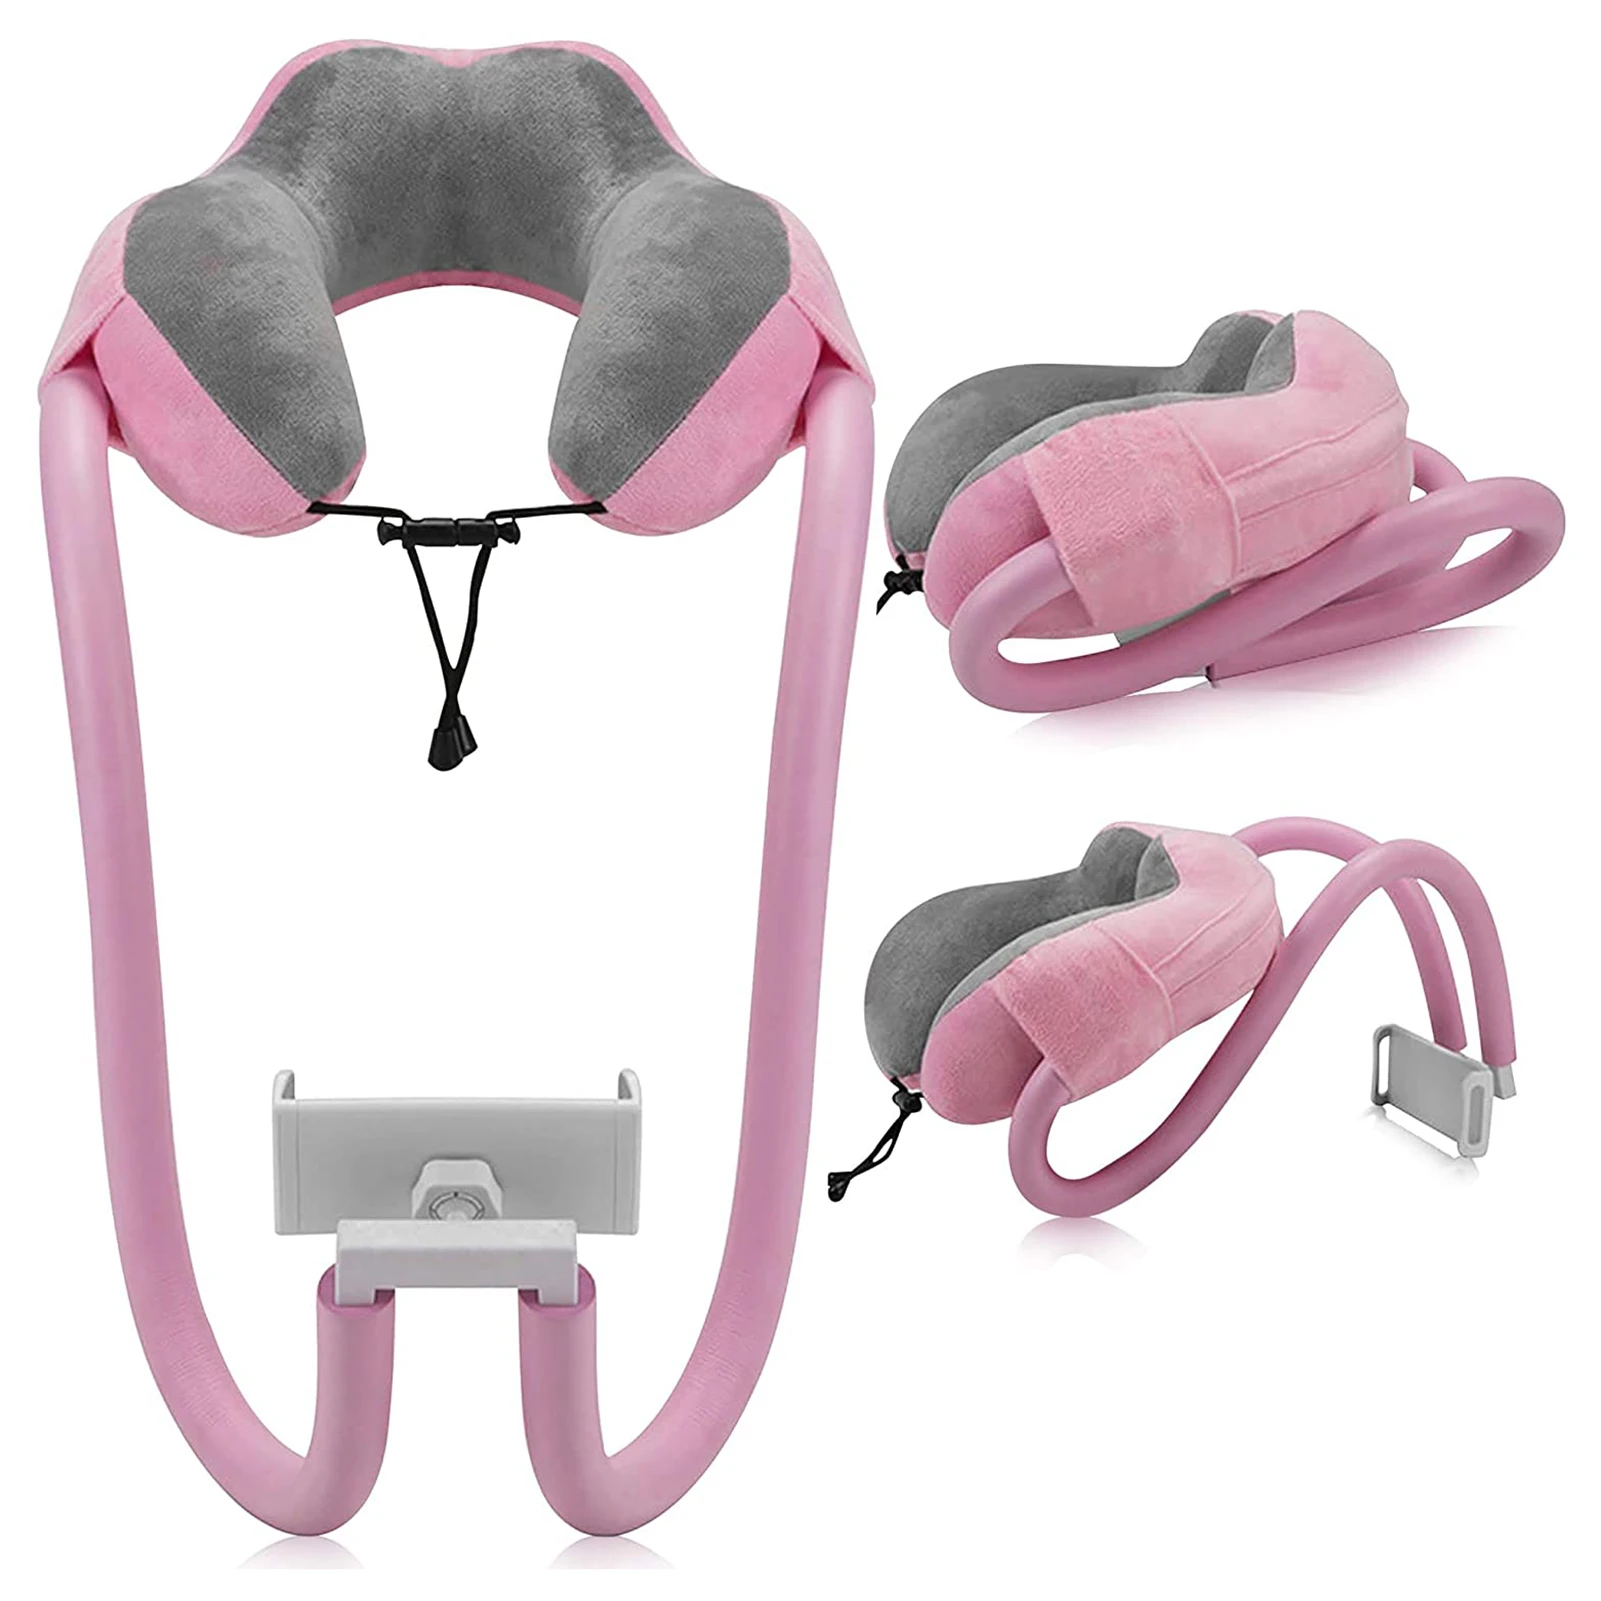 

Mobile Phone Holder With Lazy Support U-shaped Pillow Nap Pillow Memory Foam Cervical Spine Neck Pillow Tablet Computer Stands